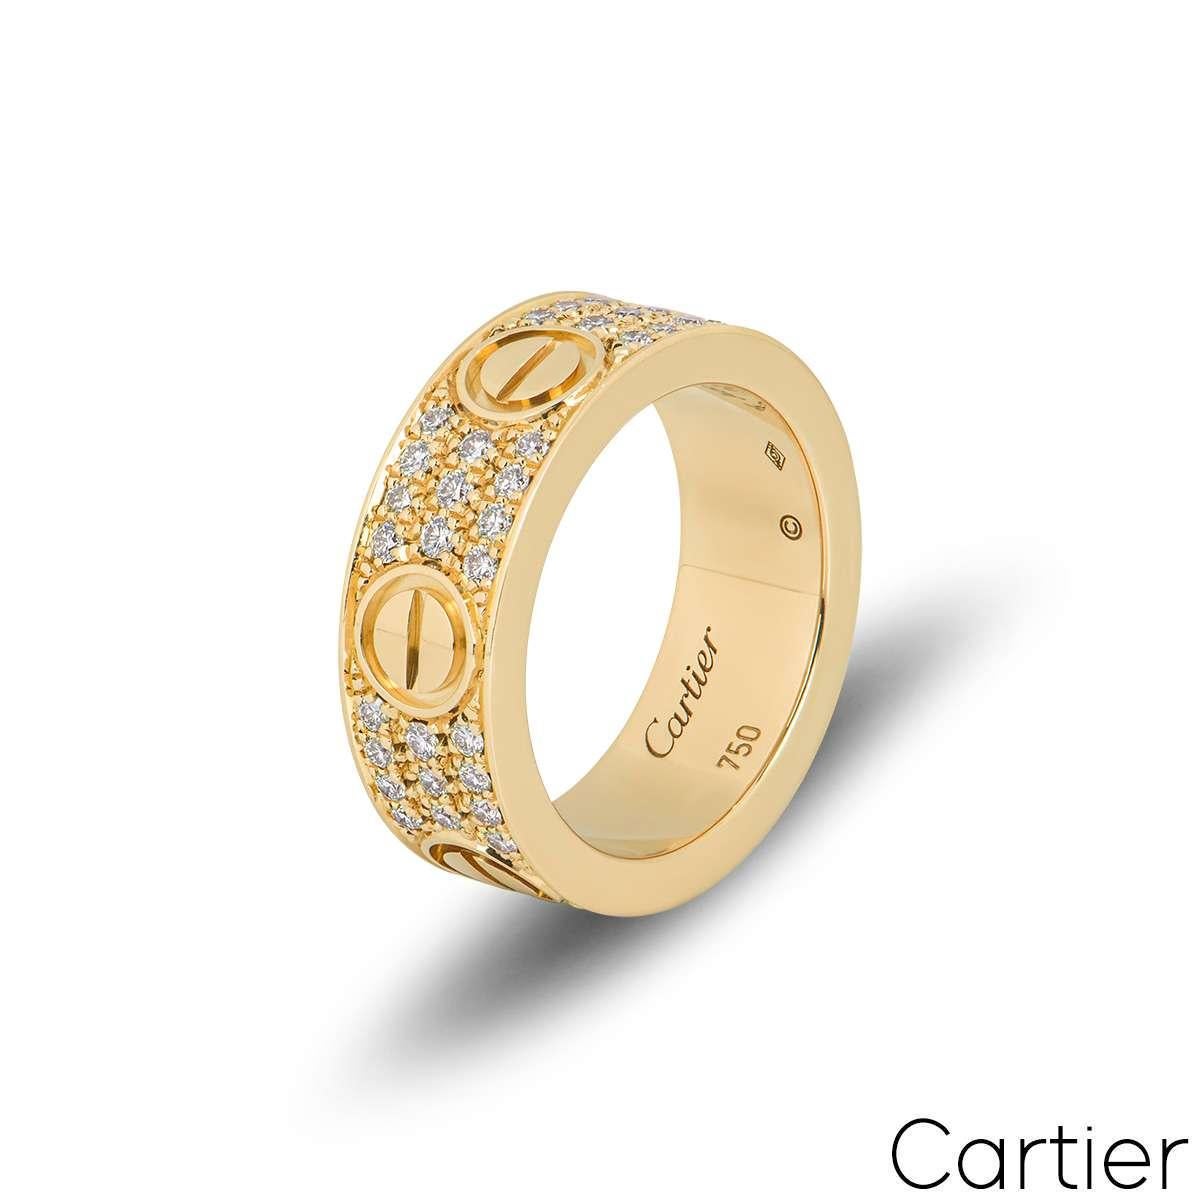 An 18k yellow gold diamond ring by Cartier from the Love collection. The ring comprises of the iconic screw motifs displayed around the outer edges with 66 round brilliant cut diamonds pave set between each screw motif with a total diamond weight of